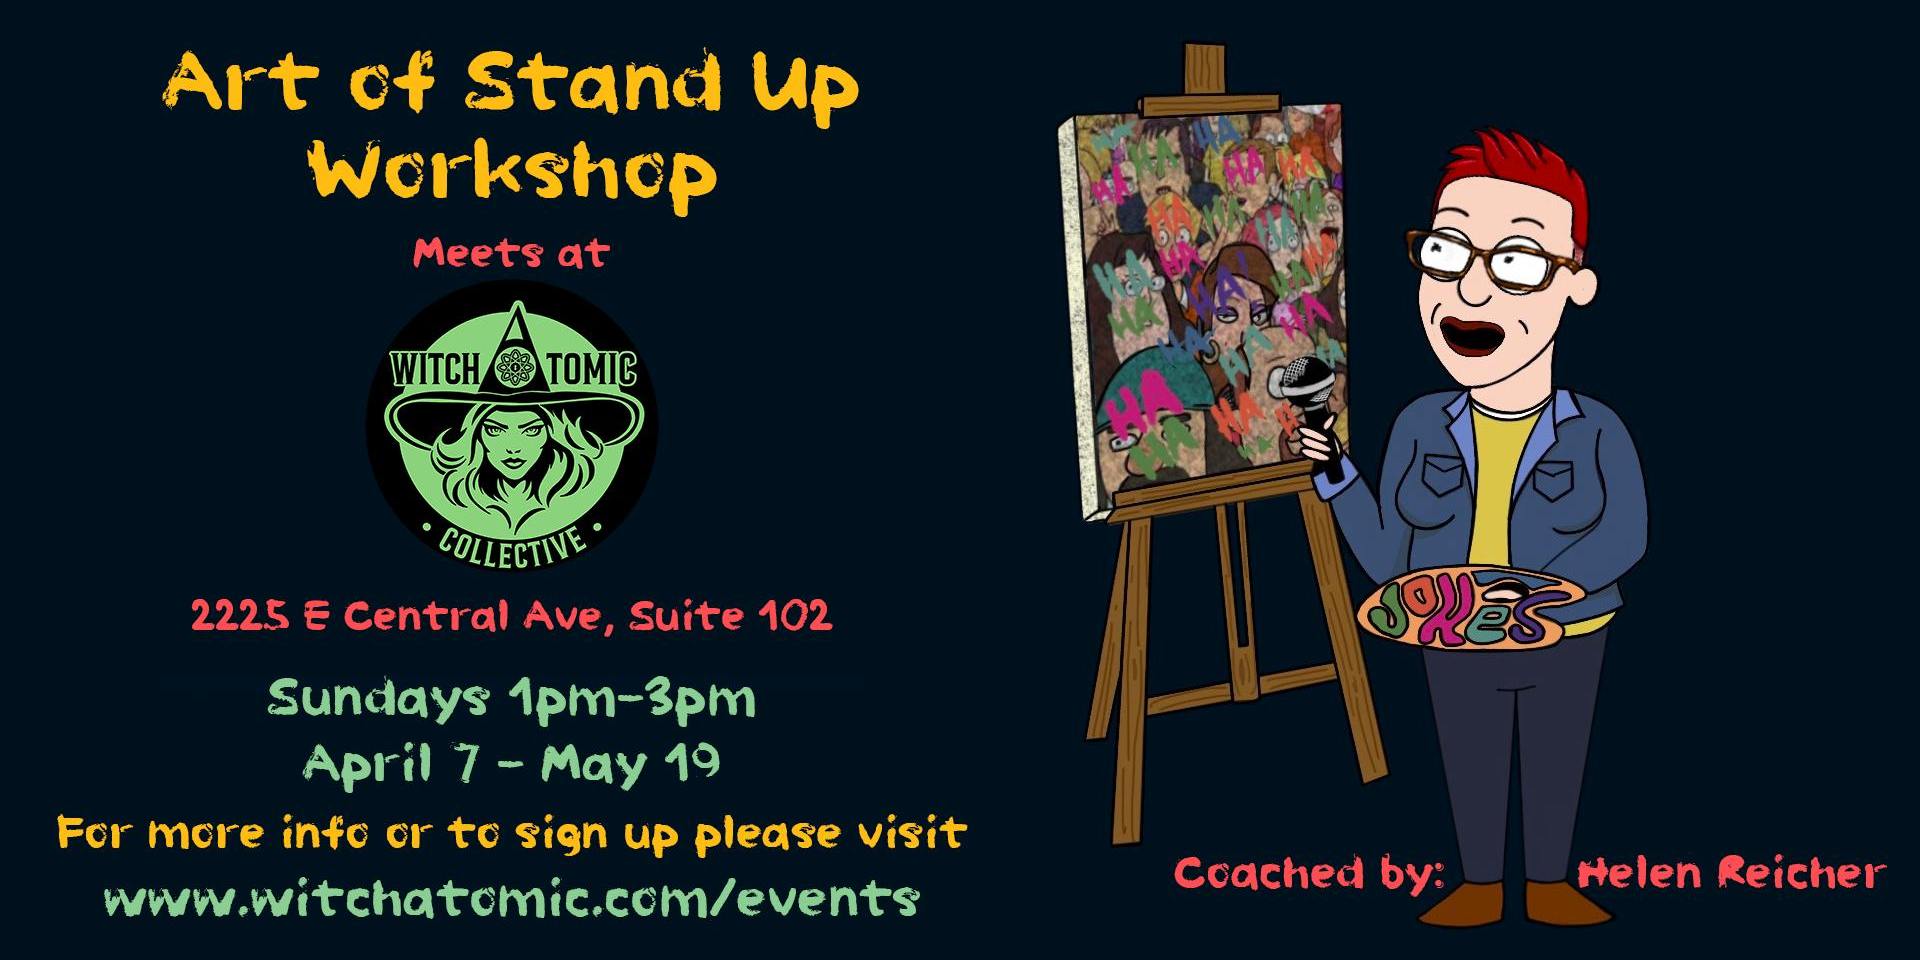 Free Art of Stand Up Workshop promotional image